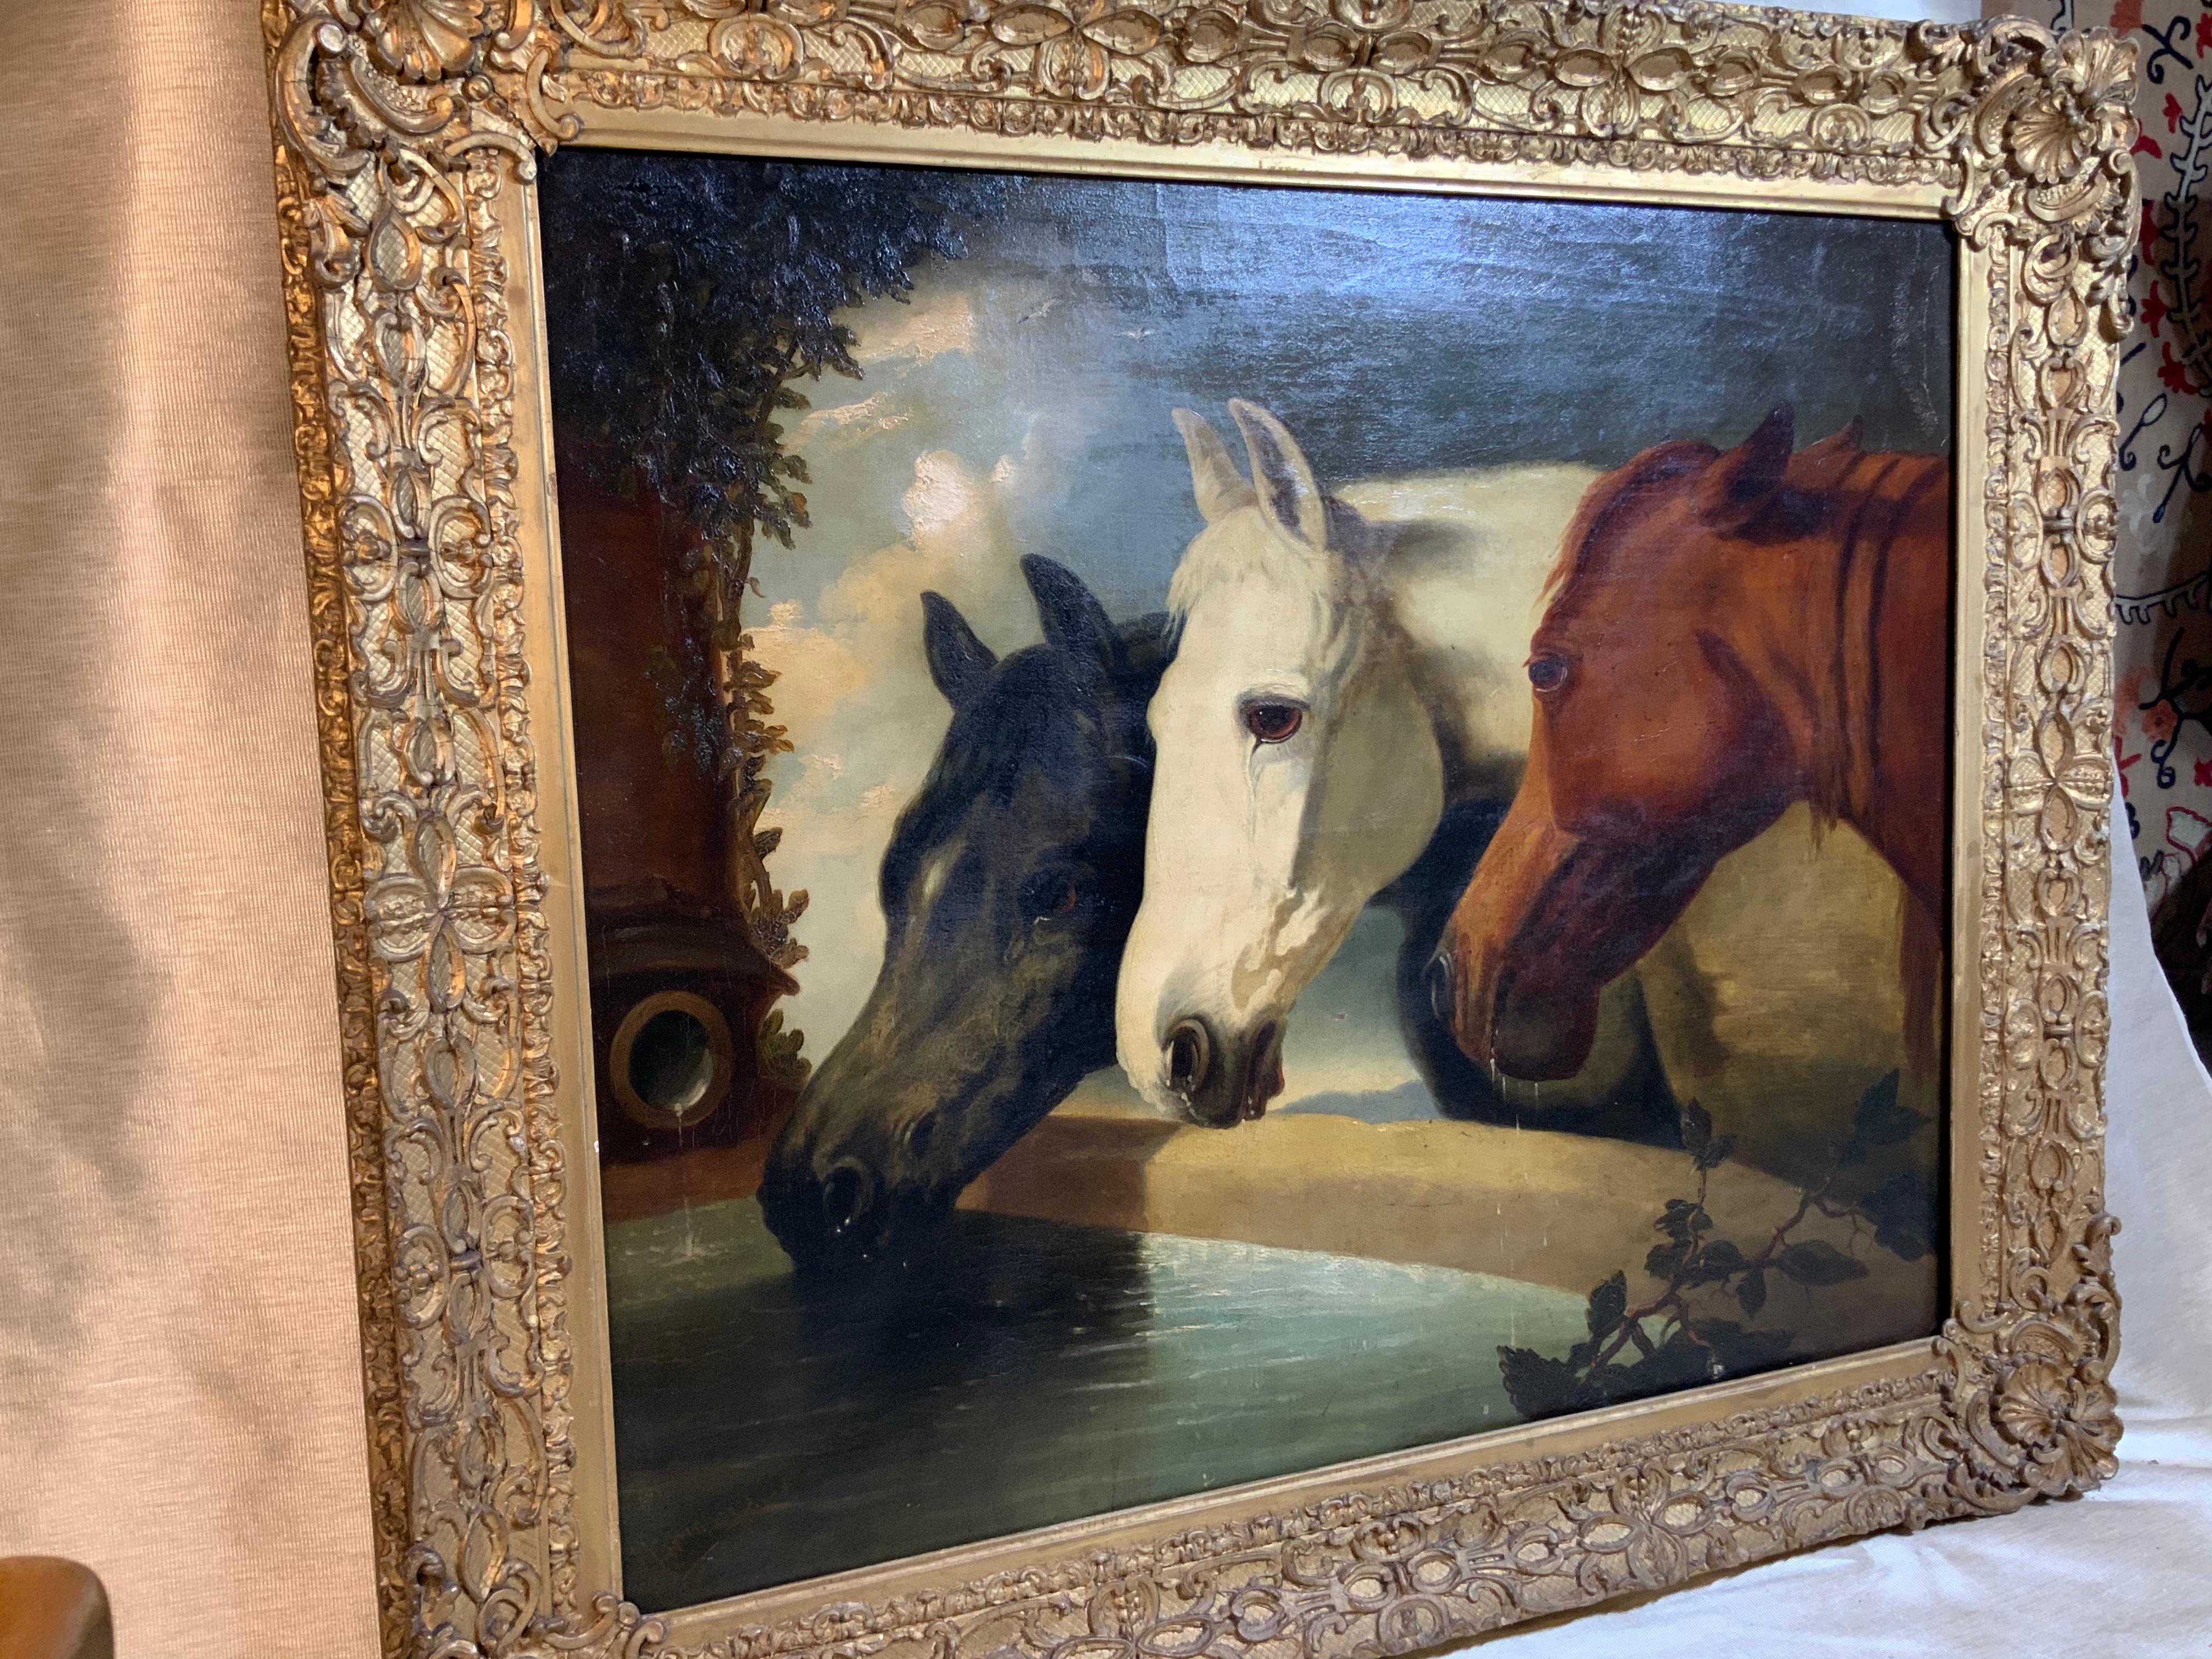 John F. Herring Jr. was born in Doncaster, South Yorkshire circa 1820, to the well-known 19th century artist John Frederick Herring Sr. (1795–1865), who at the time, was considered one of England's great Sporting and Equestrian artists, patronized